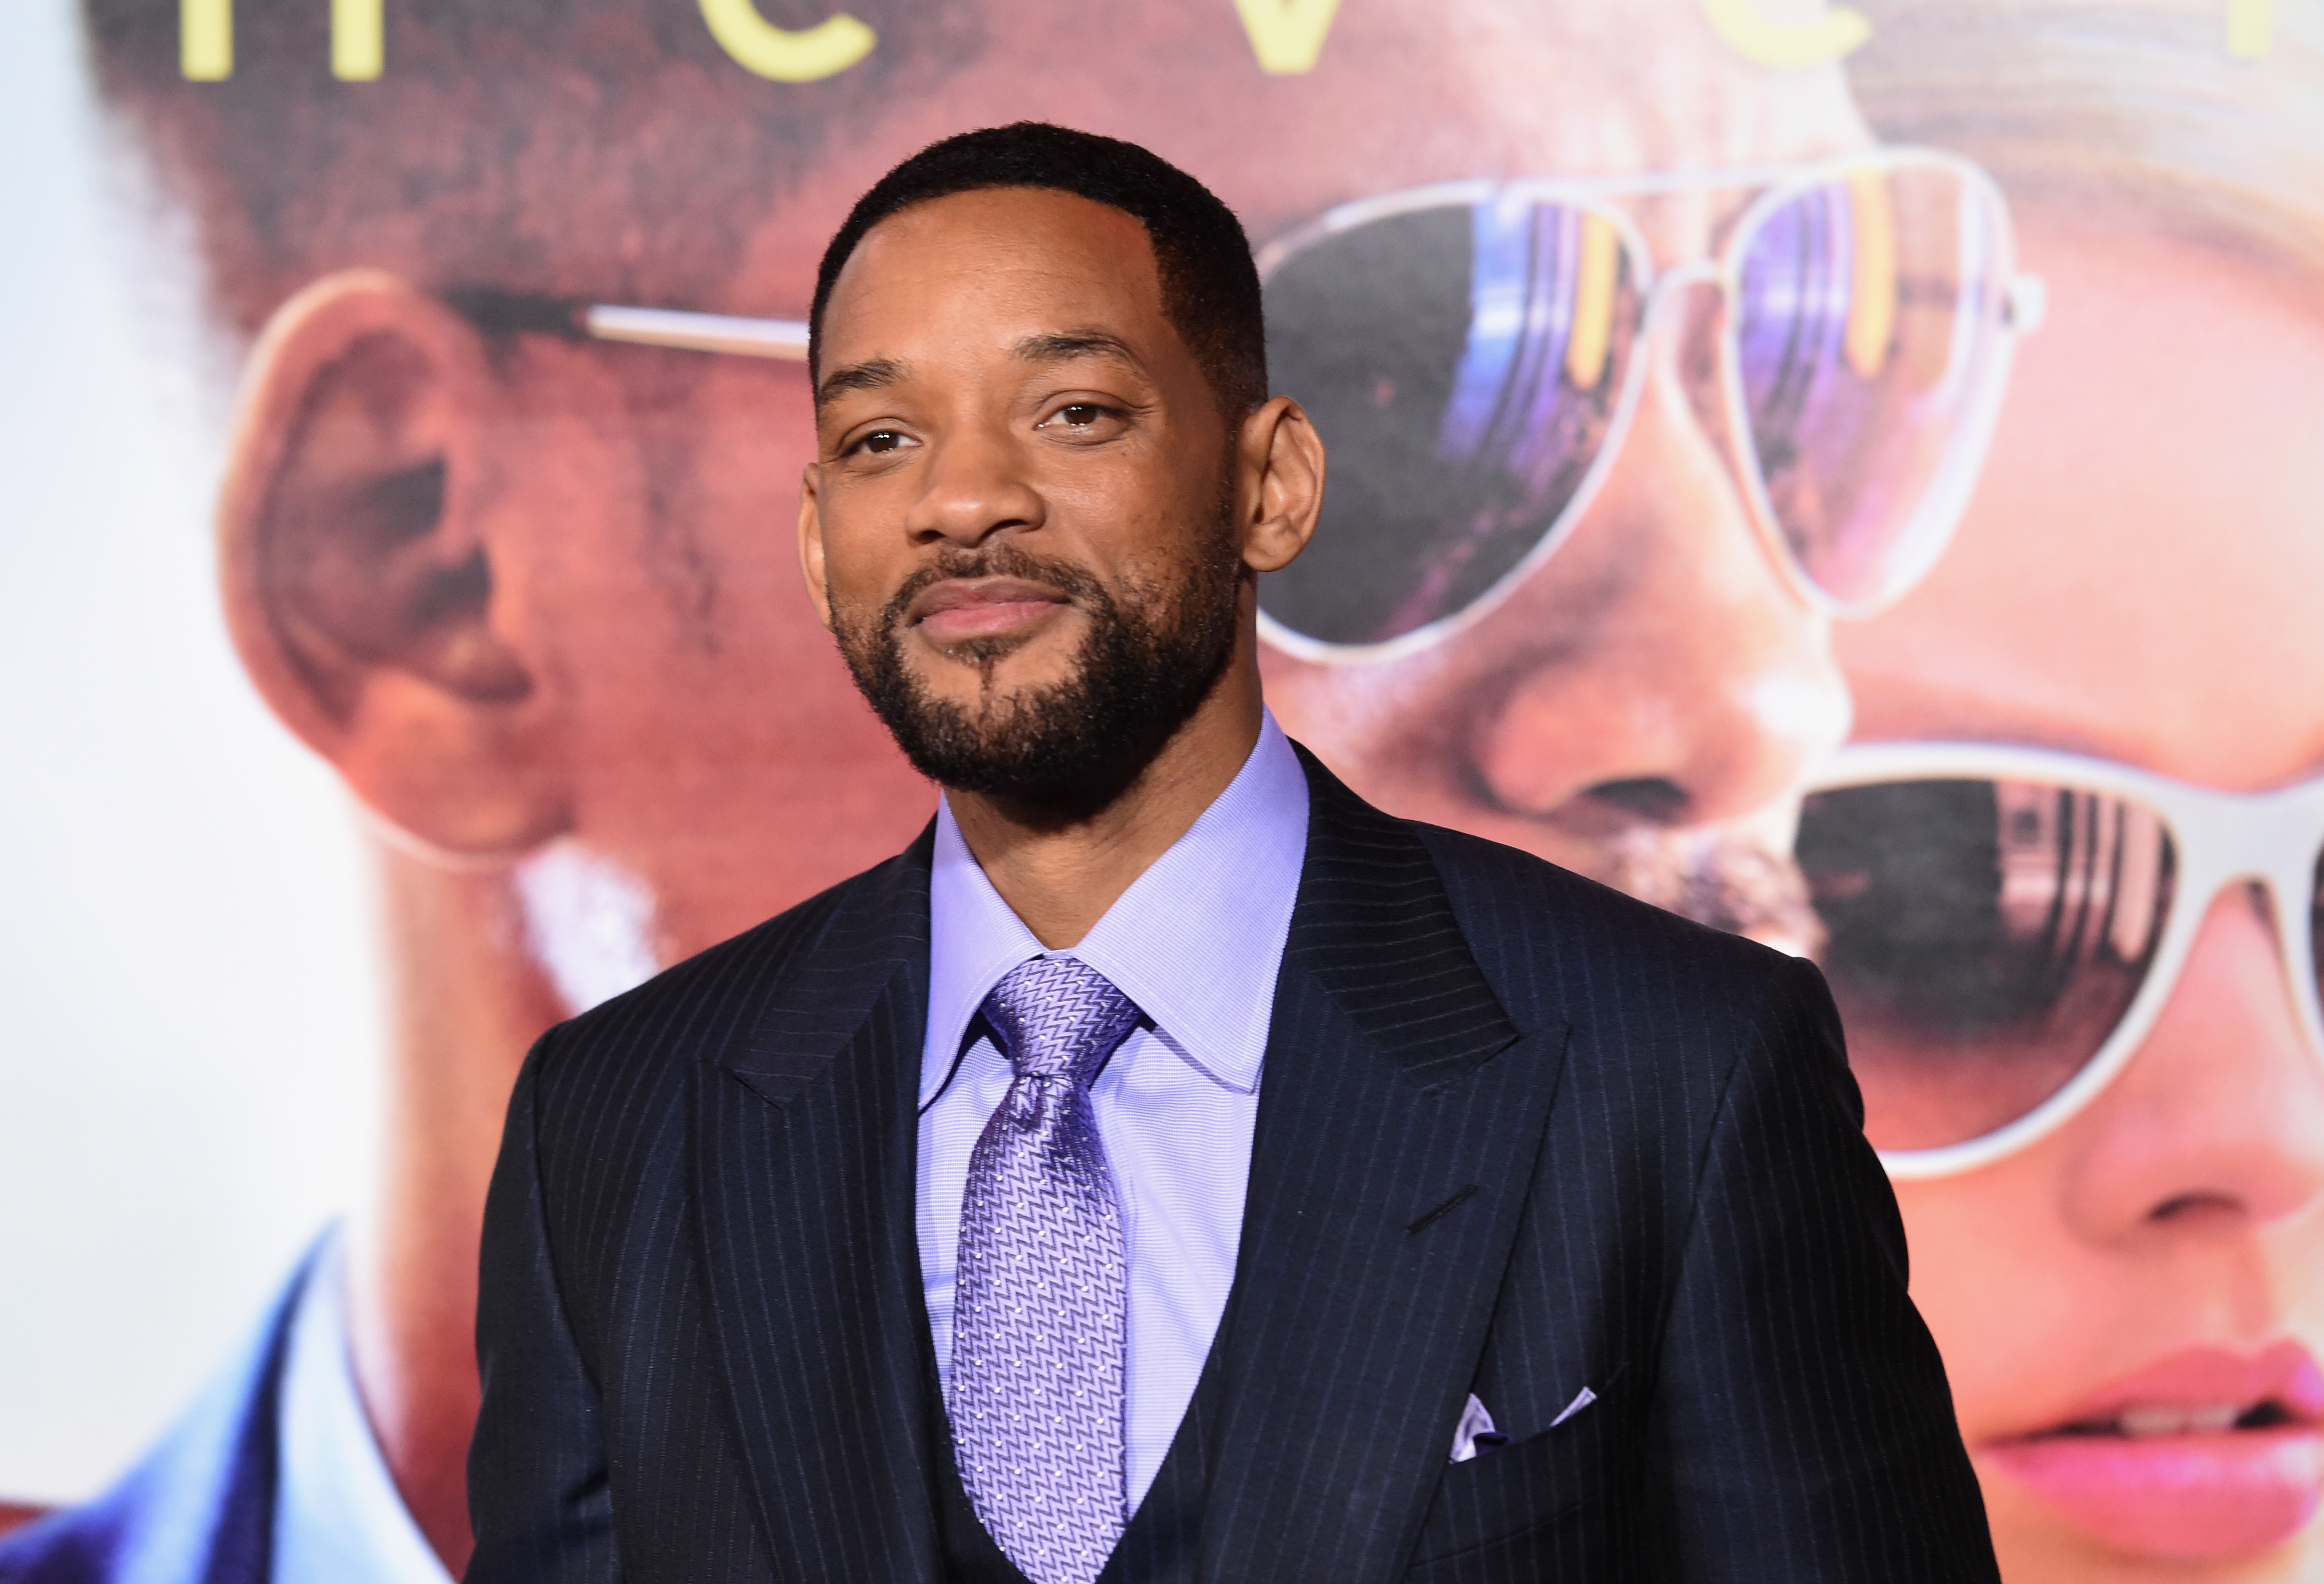 Will Smith at a movie premiere for Focus.